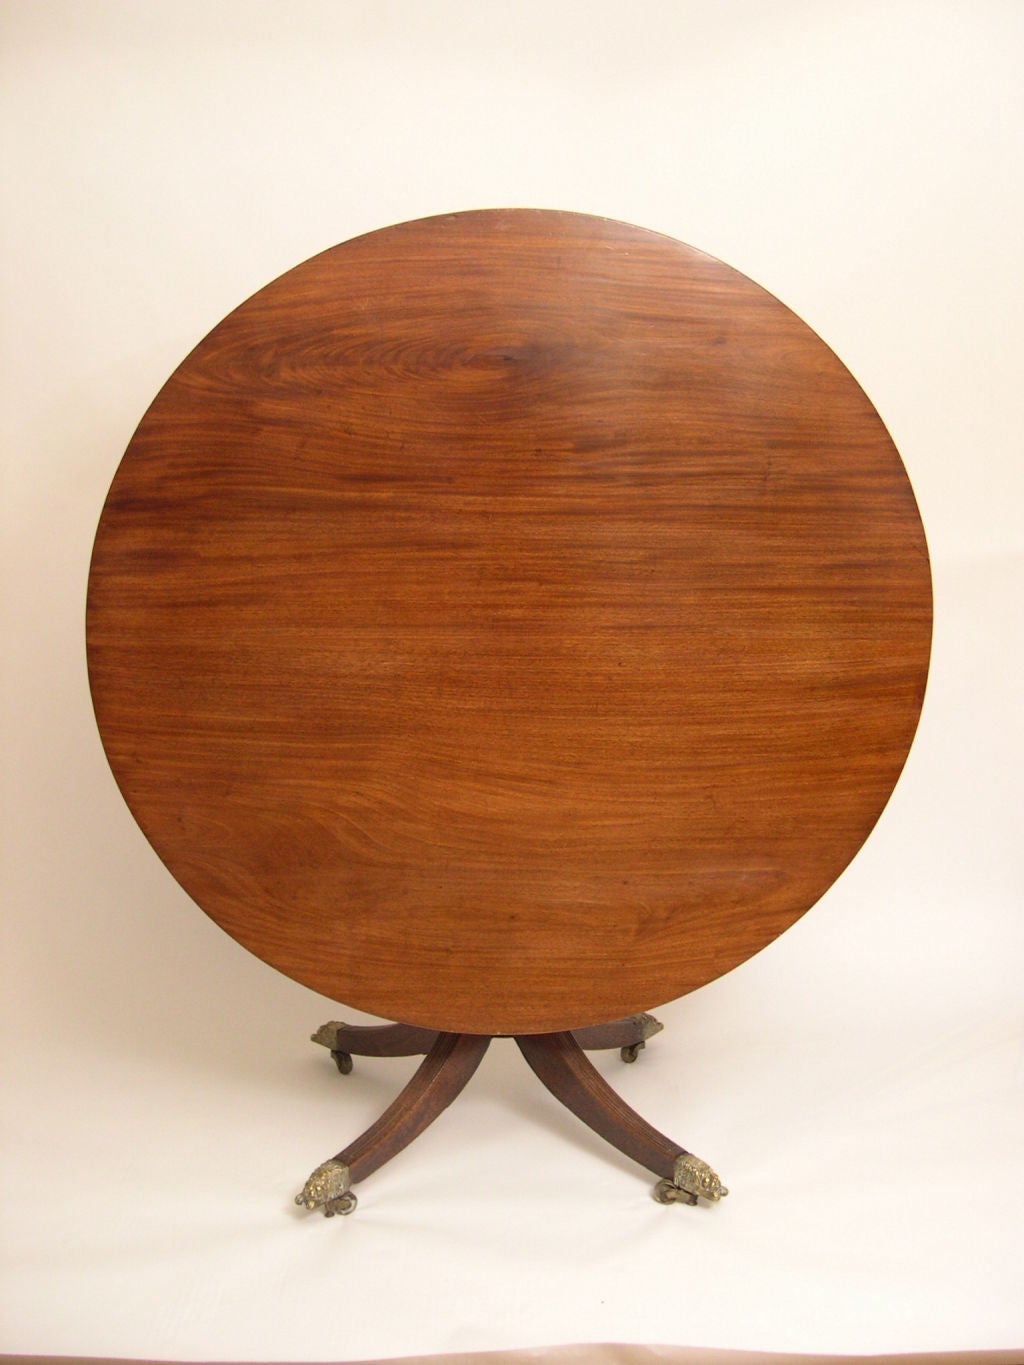 A fine Regency period tilt top pedestal round table in mahogany with reeded edges and legs, retaining its original brass recumbent lion-form caps and castors.